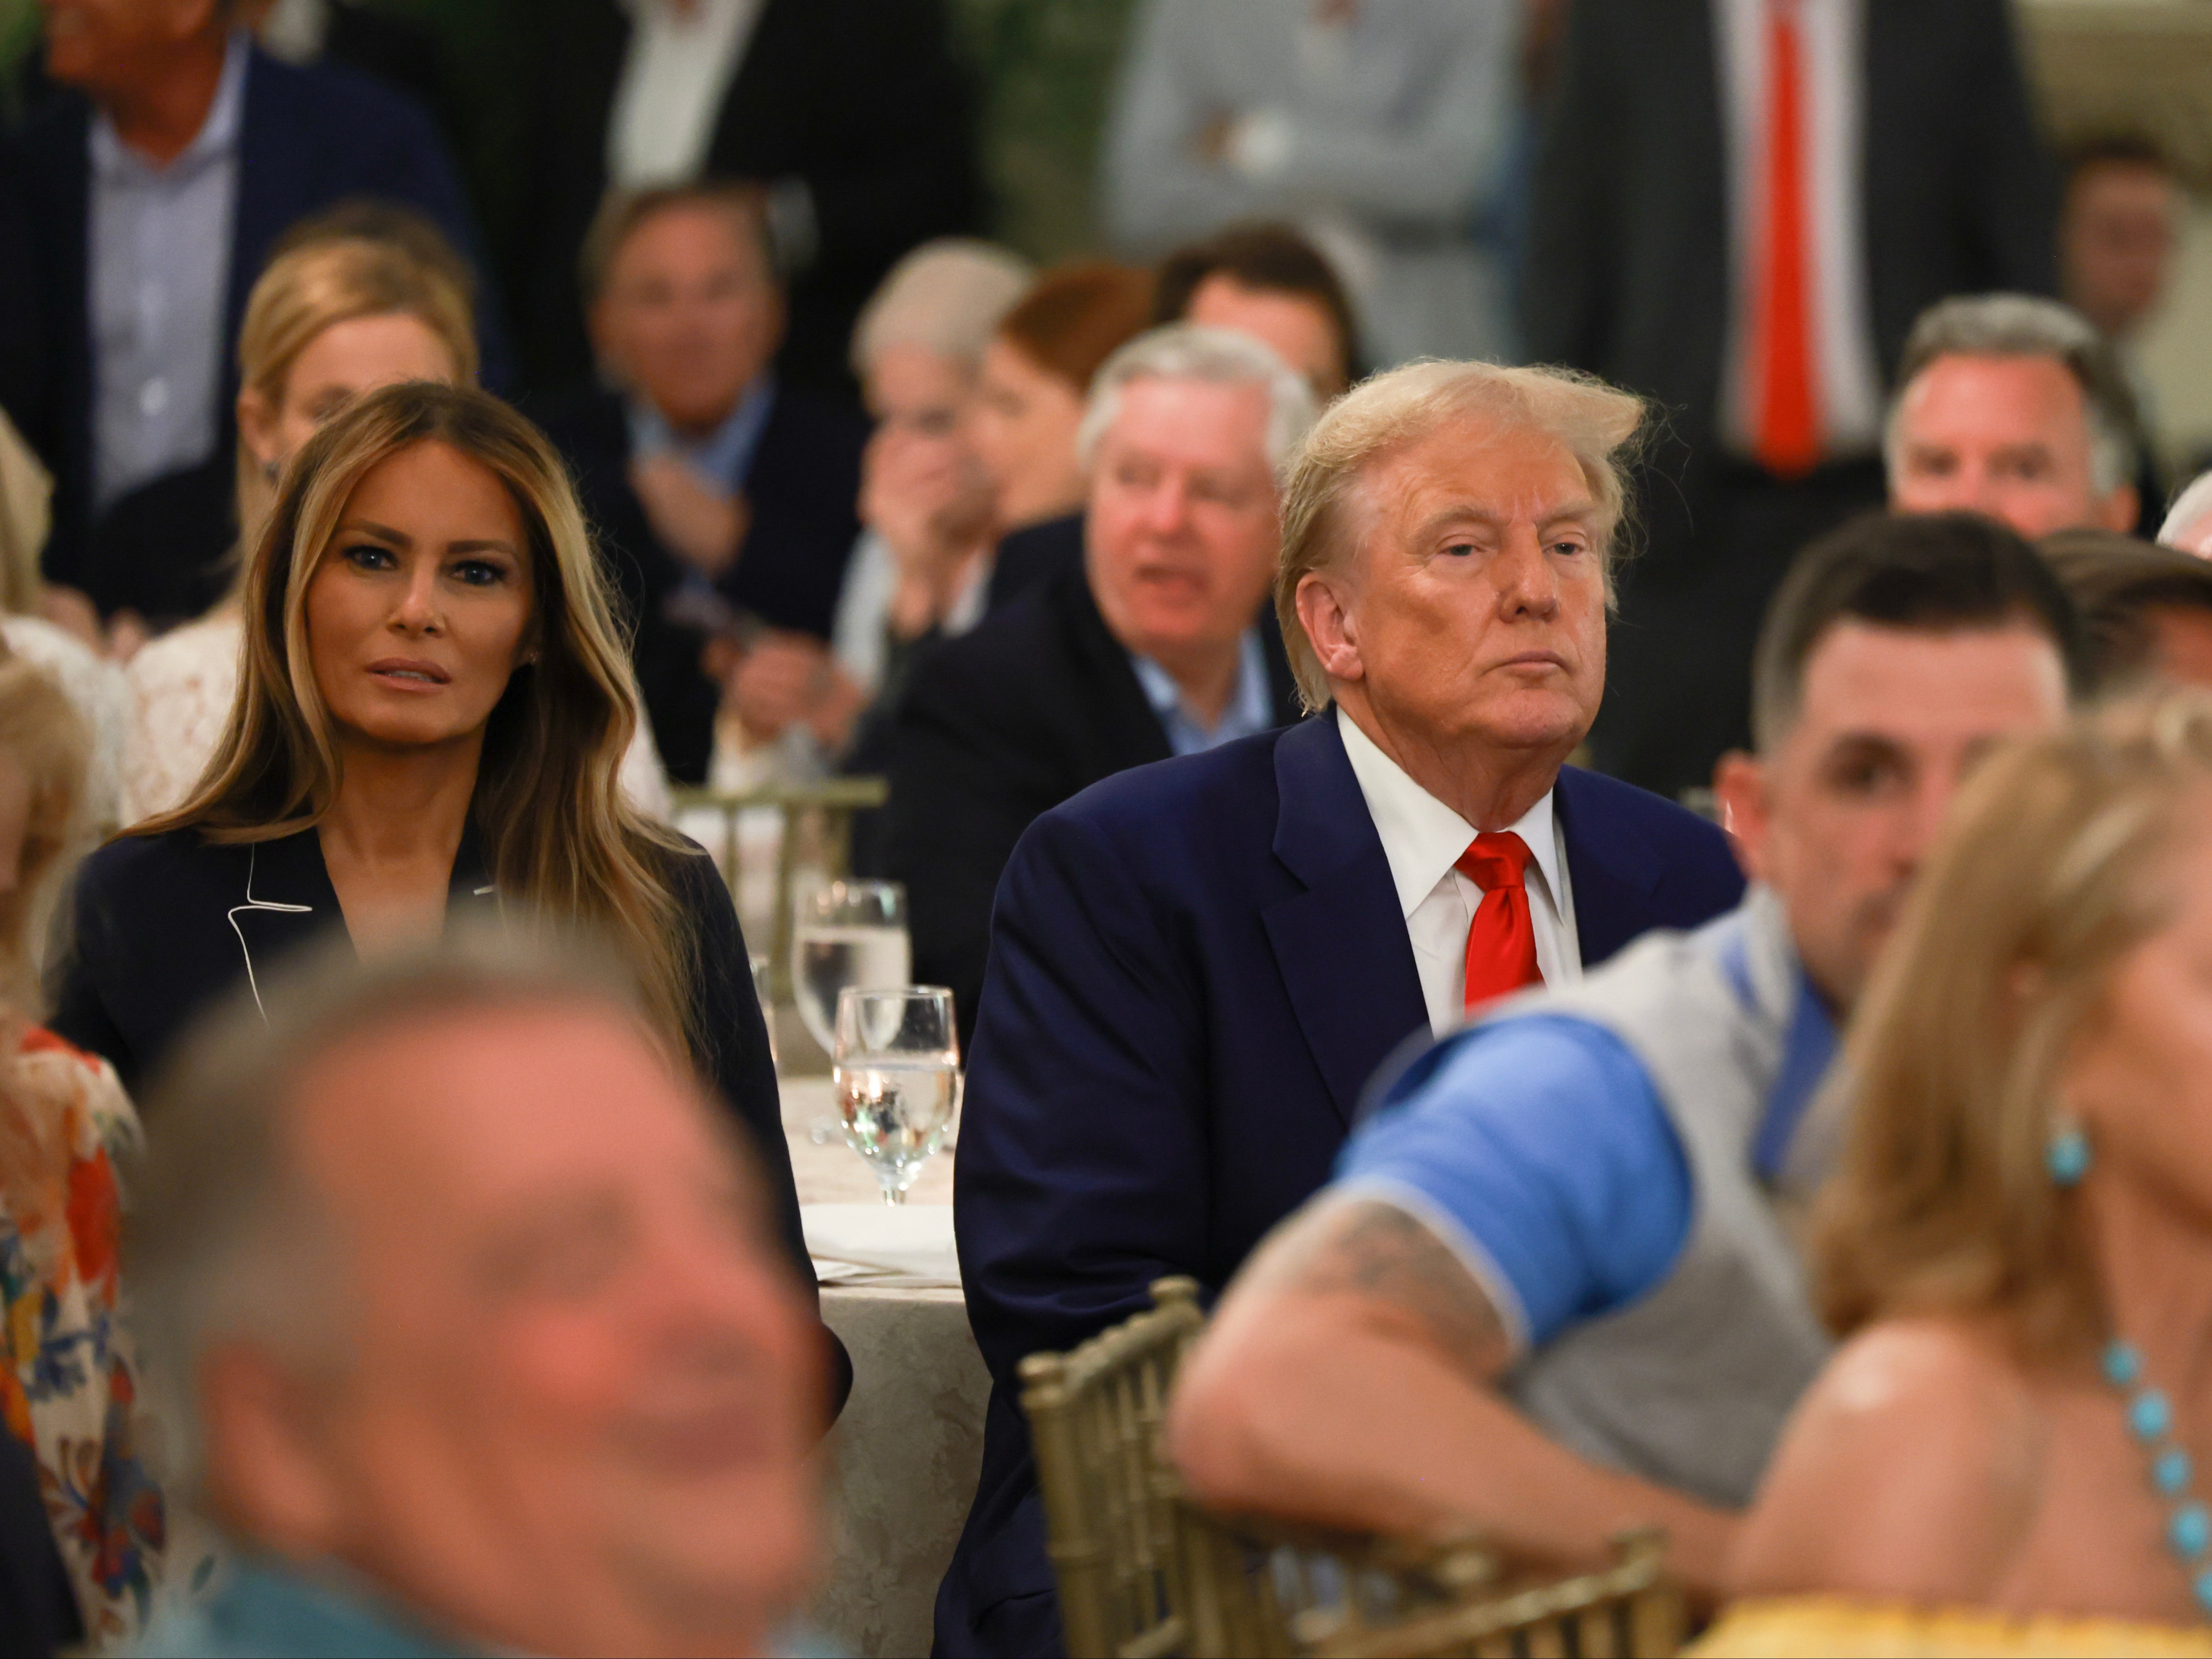 Republican presidential candidate and former President Donald Trump, and Melania Trump, attend a golf awards ceremony at the Trump International Golf Club on March 24, 2024, in West Palm Beach, Florida